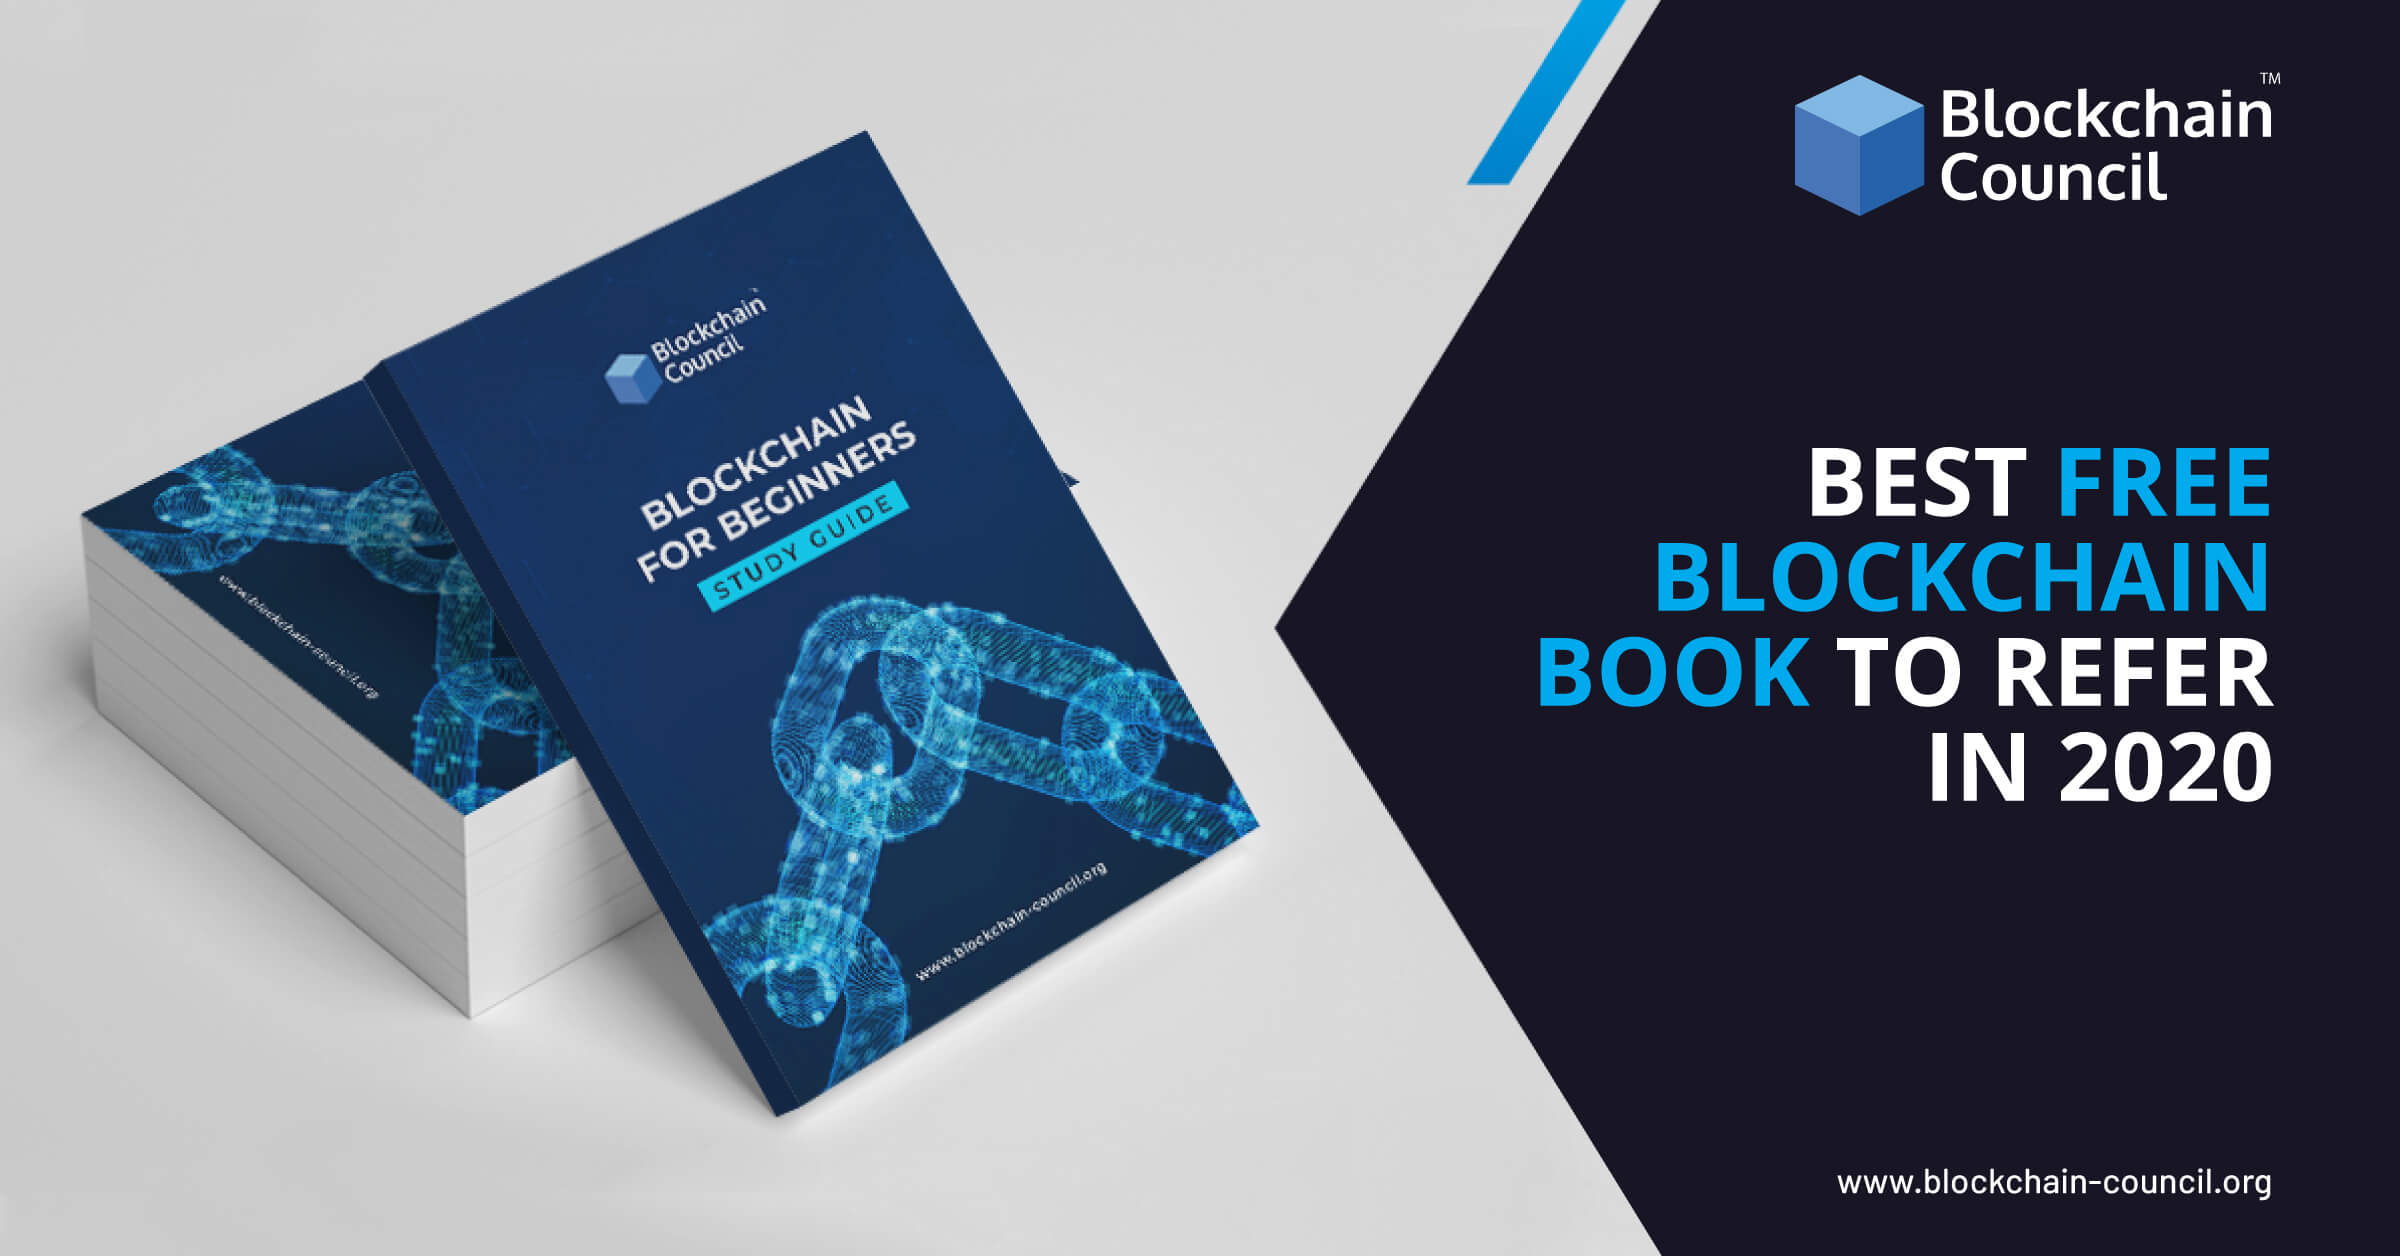 Best Free Blockchain Book To Refer in 2020